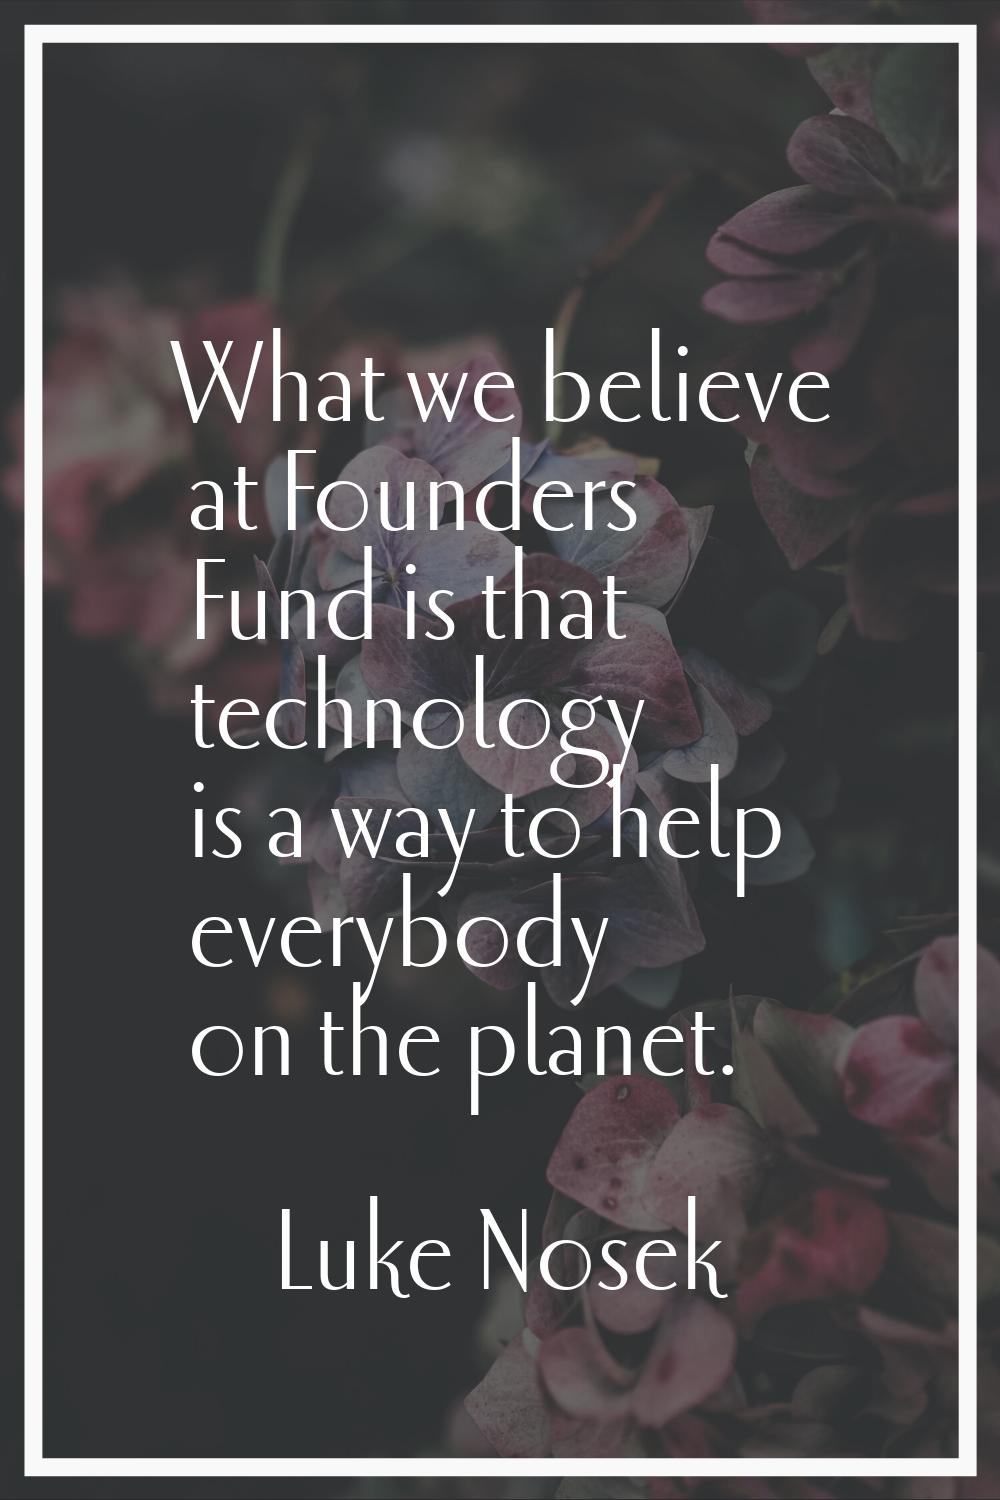 What we believe at Founders Fund is that technology is a way to help everybody on the planet.